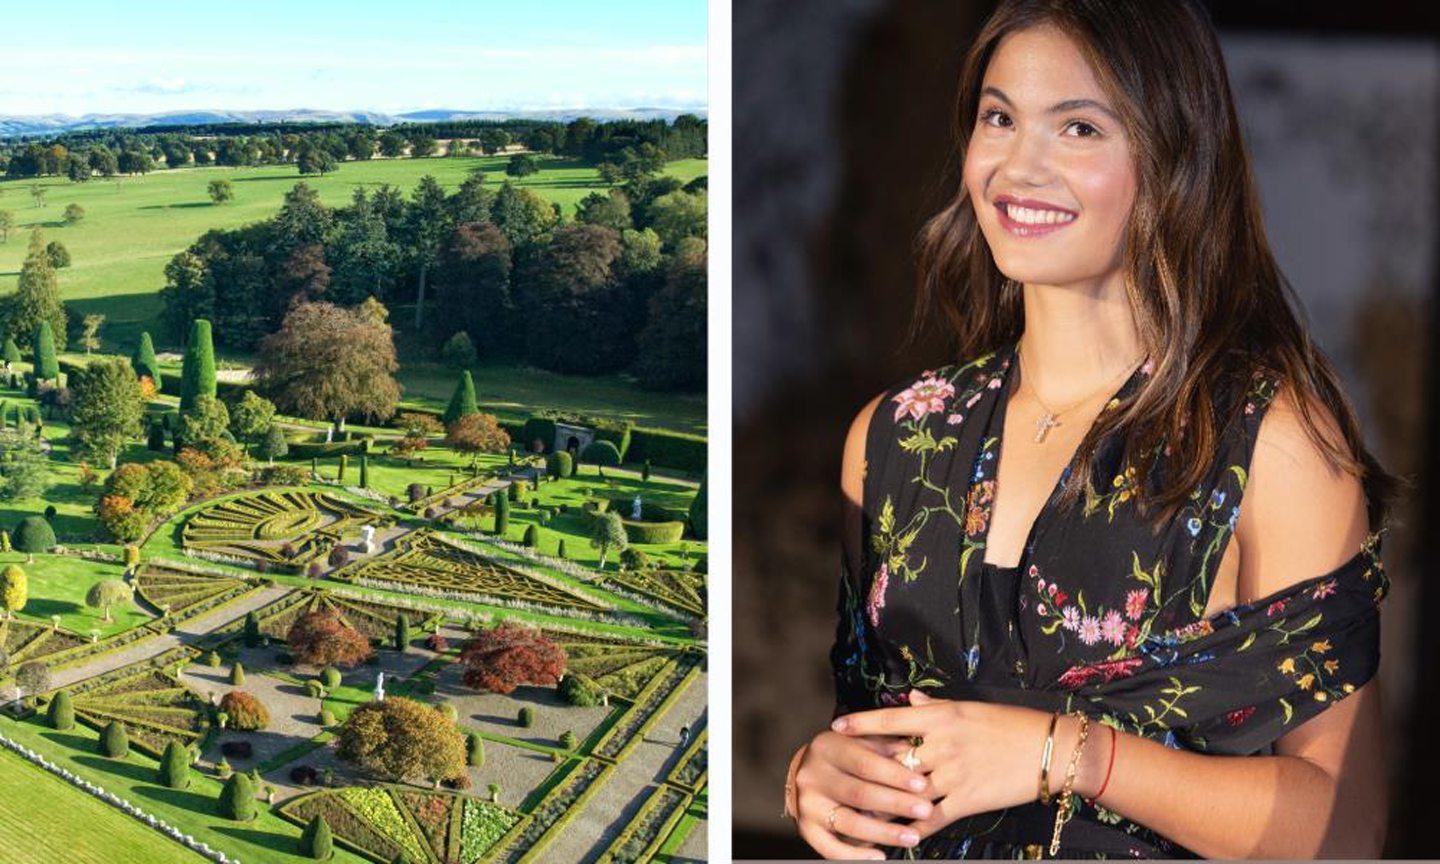 Crieff set to host big-name celebrities as Dior chooses town for fashion show